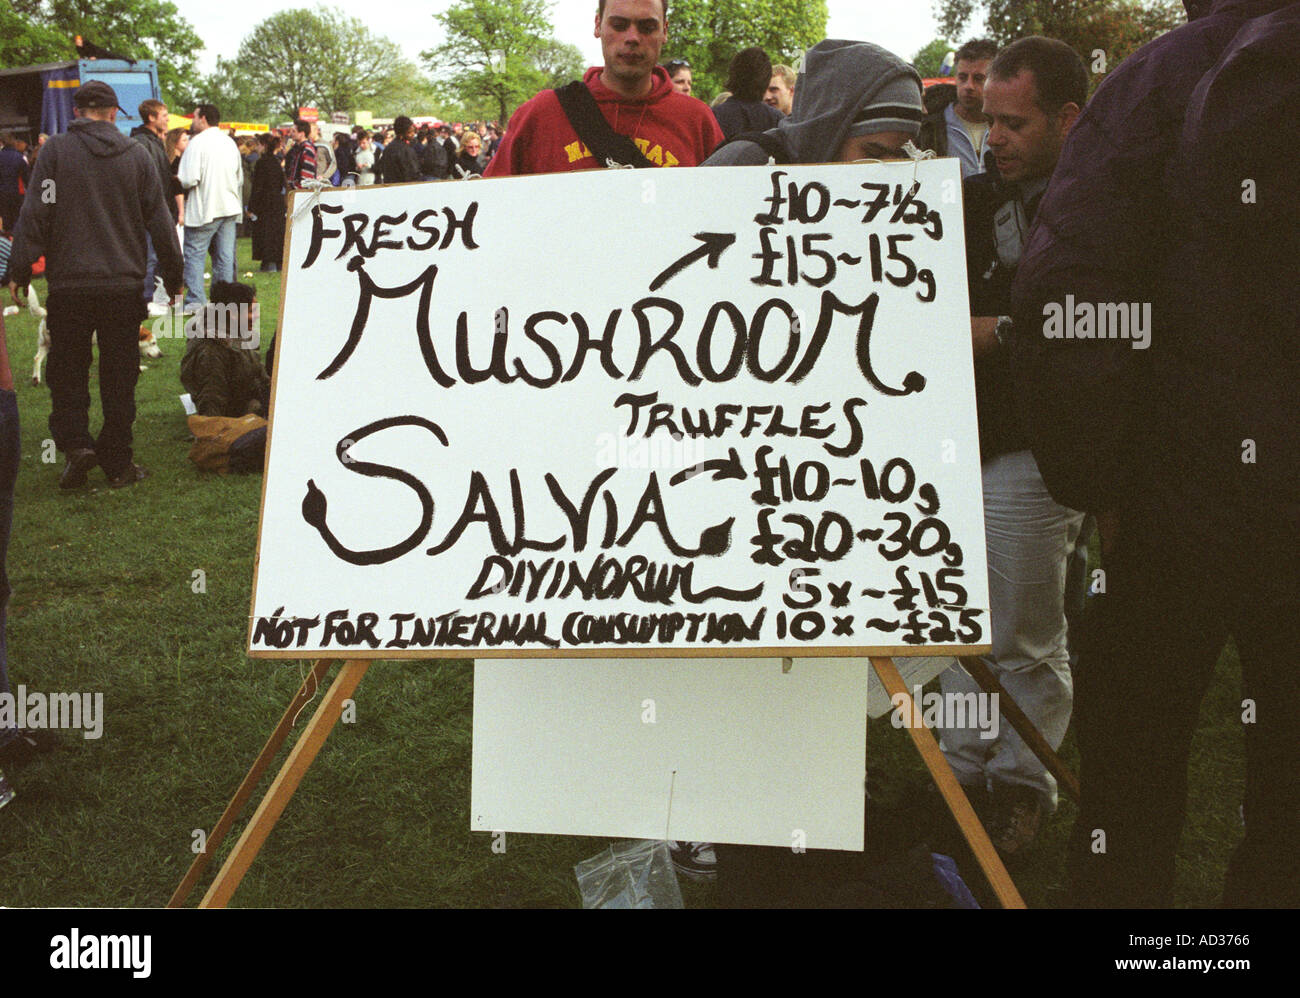 Magic mushrooms and herbal highs being sold at cannabis festival in Brockwell Park London. Stock Photo